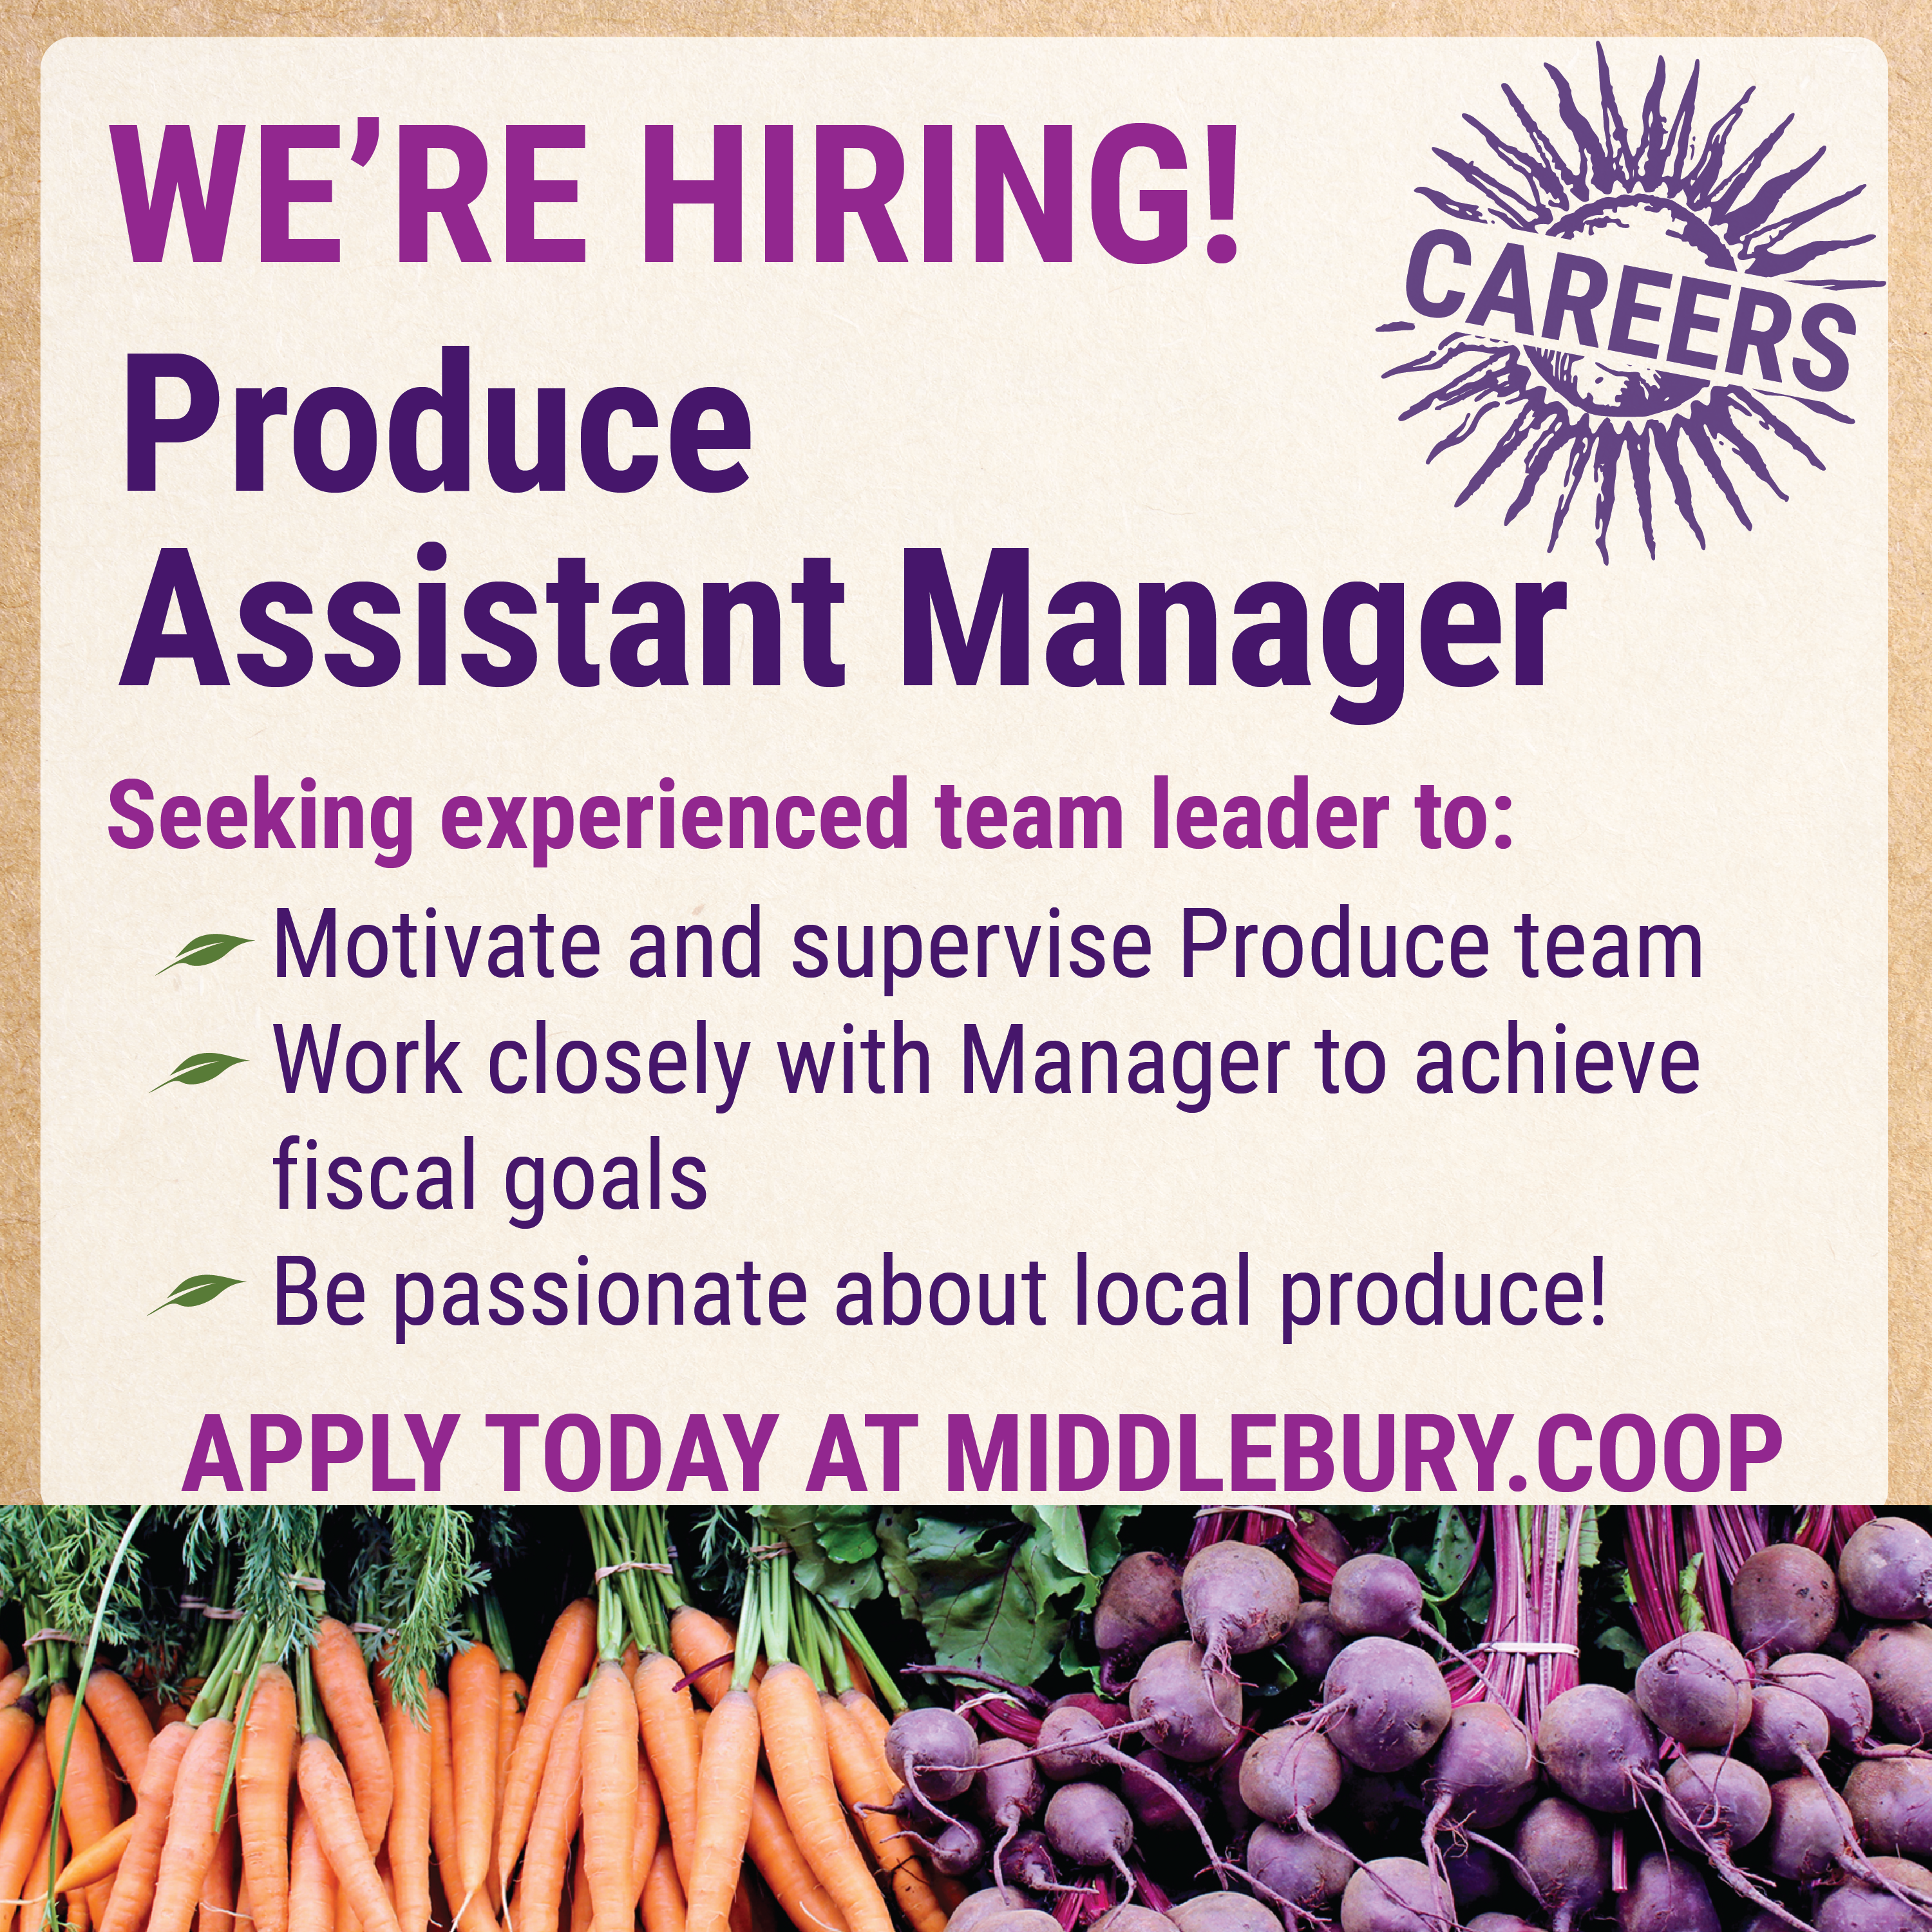 Carrots and beets decorating a job listing for produce assistant manager